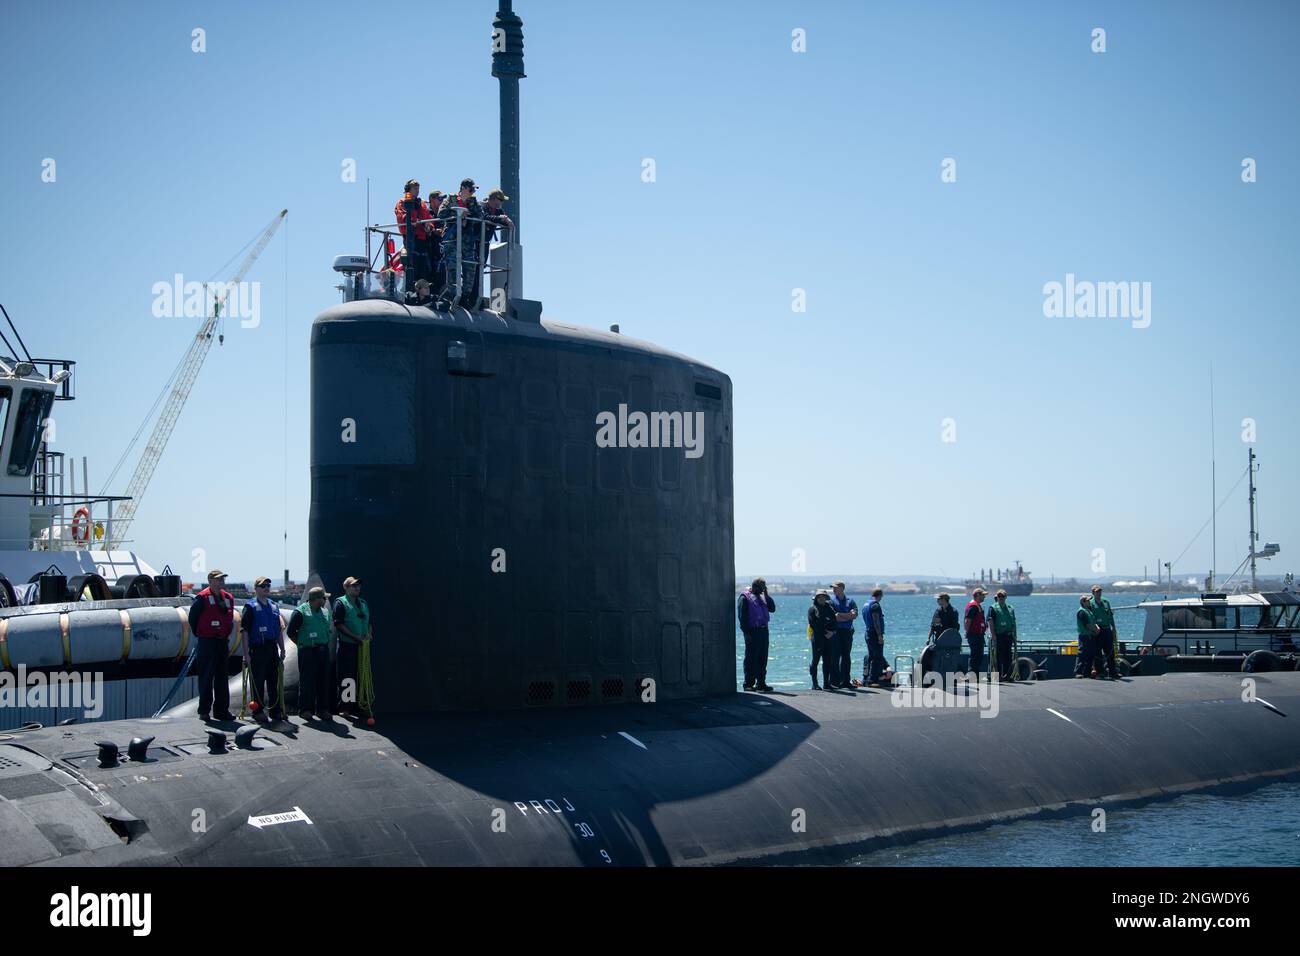 GARDEN ISLAND, Australia - The Virginia-class fast-attack submarine USS Mississippi (SSN 782) prepares to moor at Royal Australian Navy HMAS Stirling Naval Base, Nov. 28. Mississippi is currently on patrol in support of national security interests in the U.S. 7th Fleet area of operations. Stock Photo